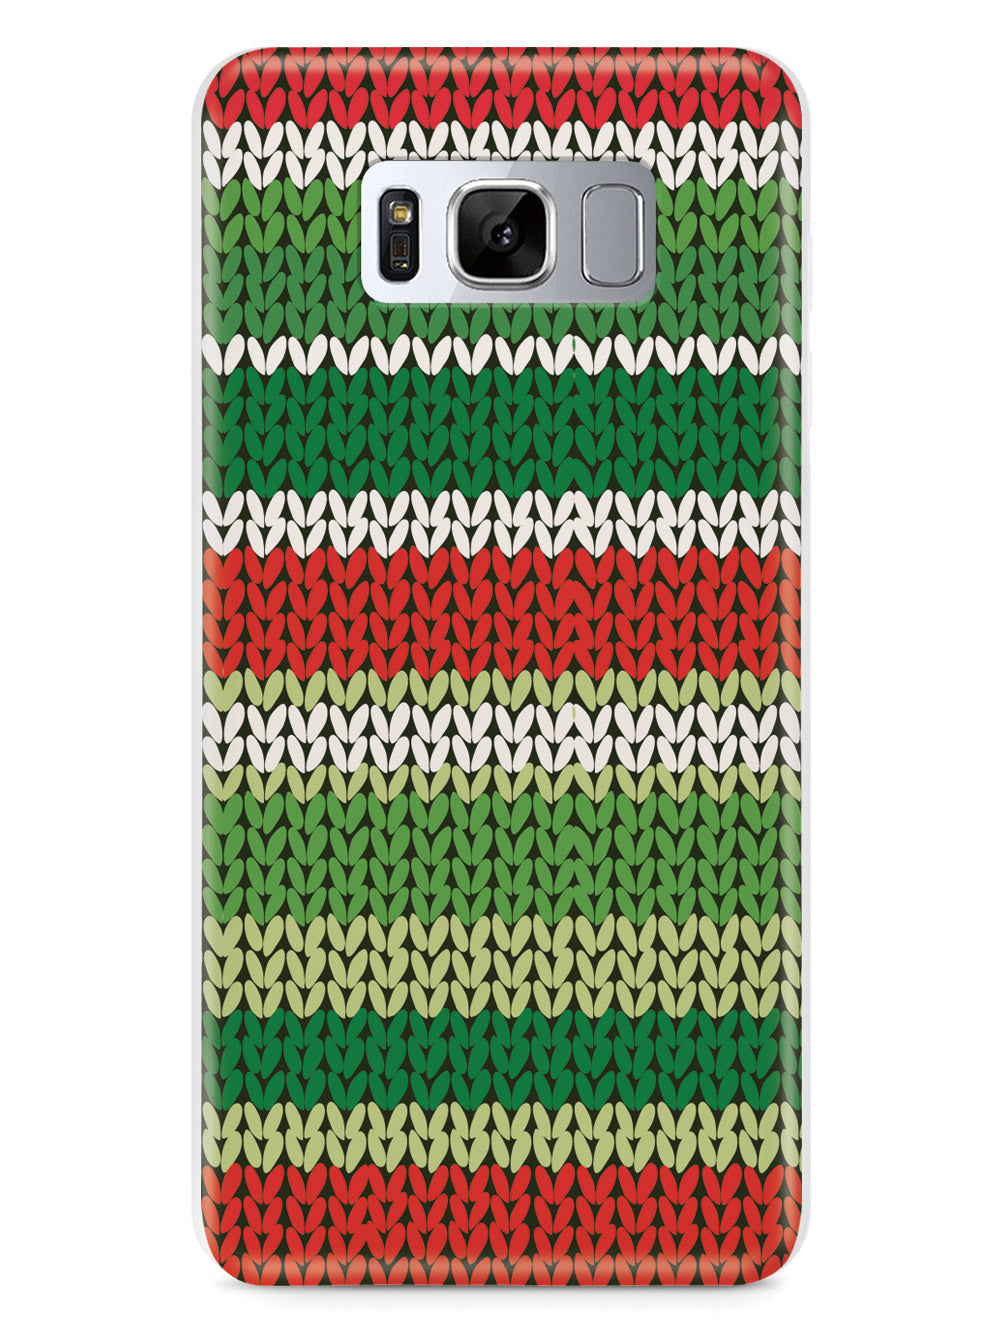 Red and Green Sweater Texture - White Case